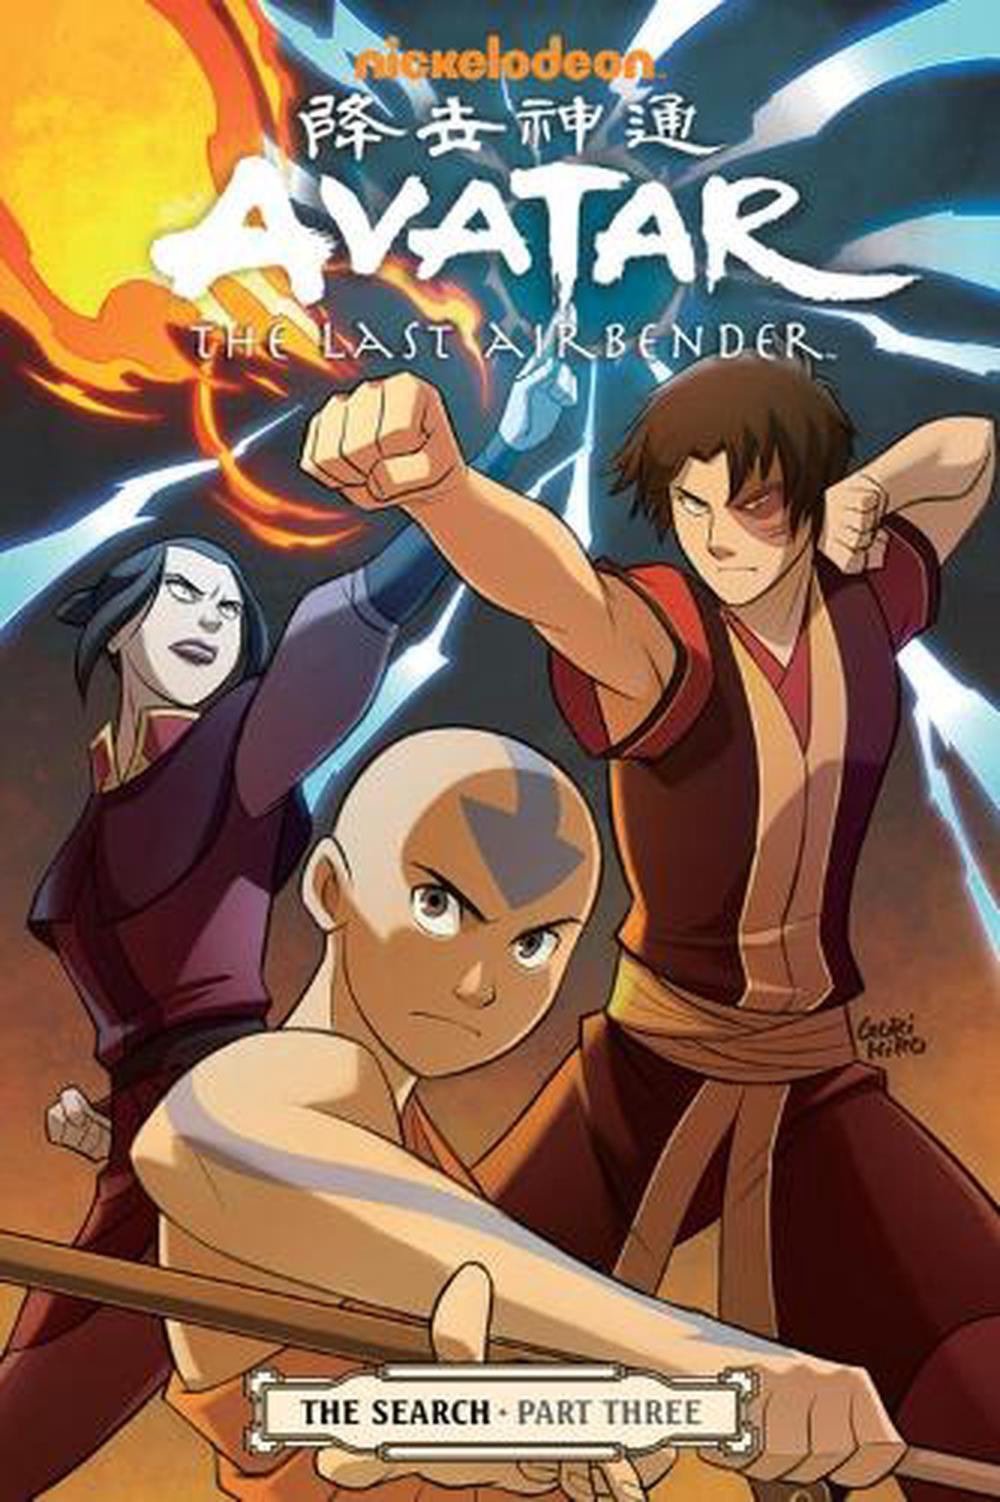 Avatar: The Last Airbender#the Search Part 3 by Gene Luen Yang (English) Paperba